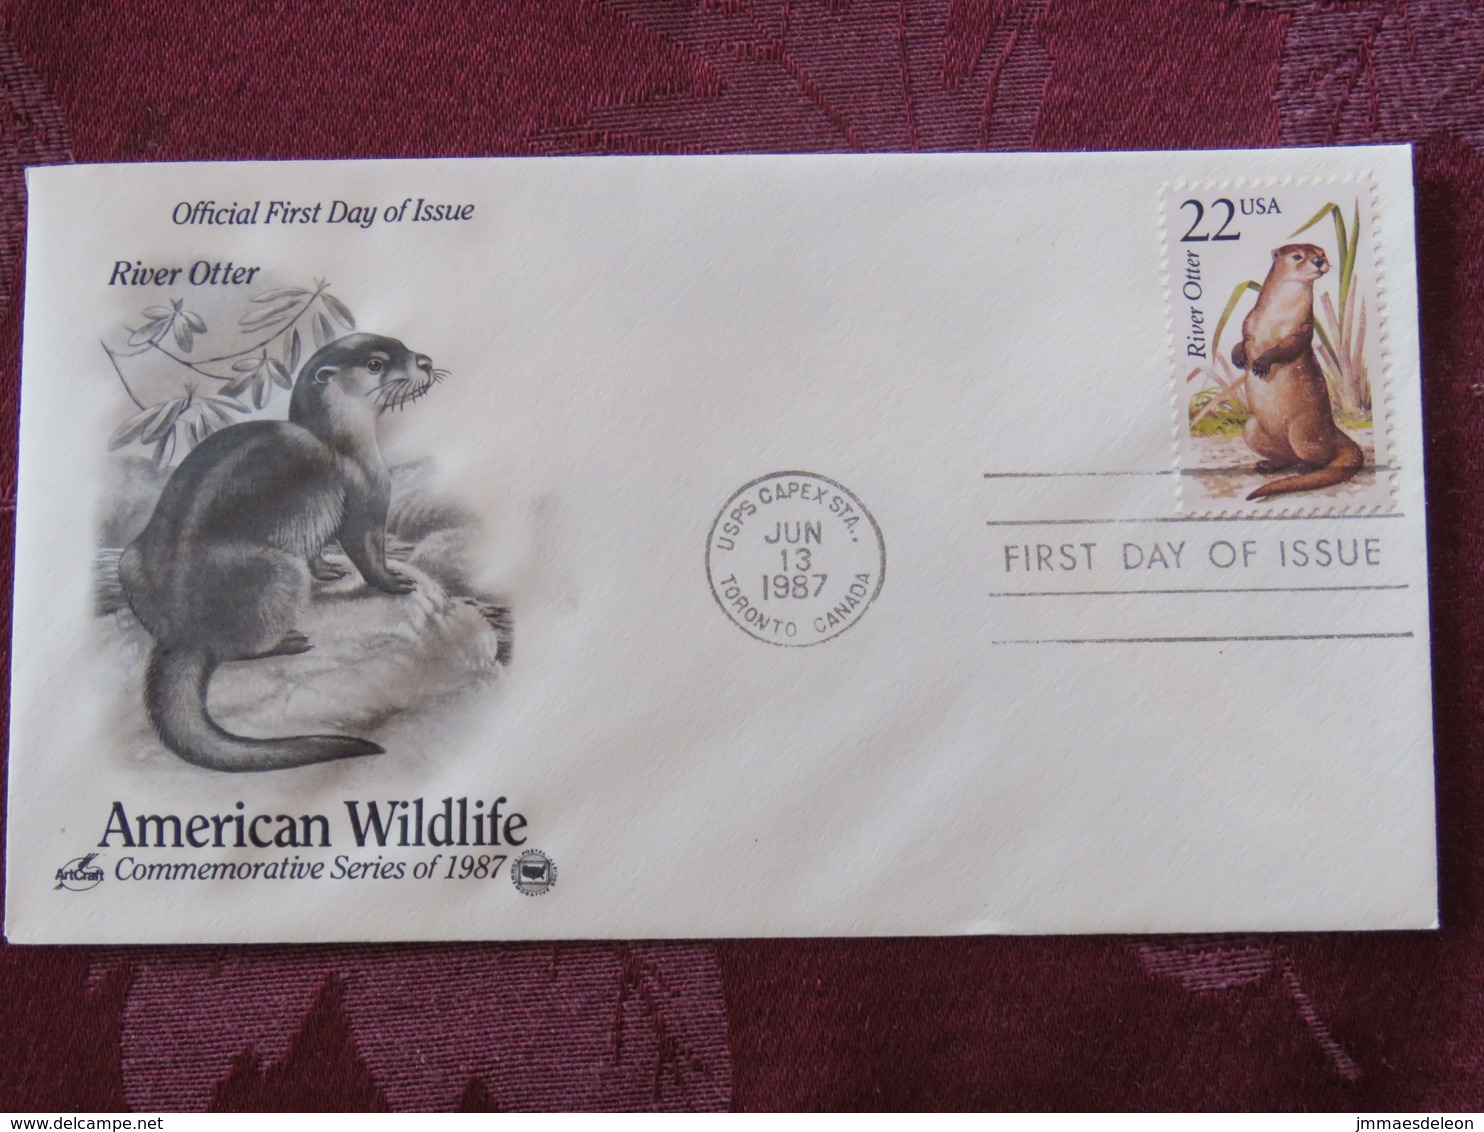 USA 1987 FDC Cover USPS CAPEX Toronto Canada - American Wildlife - River Otter - Lettres & Documents